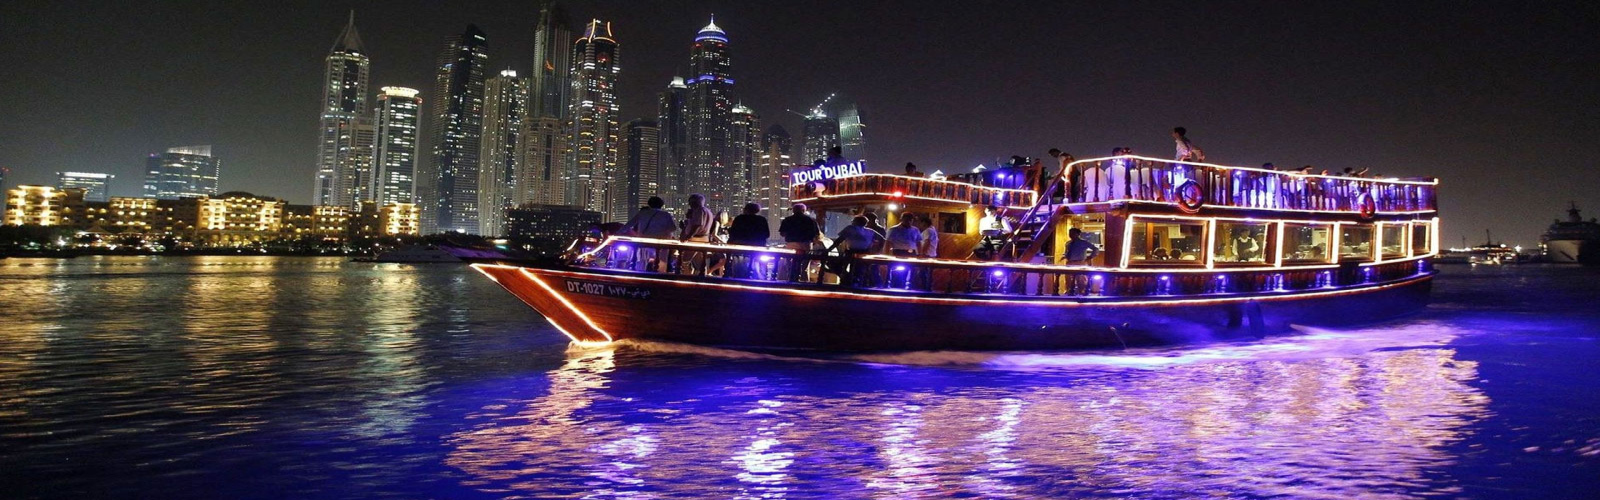 vip-dhow-cruise-dinner